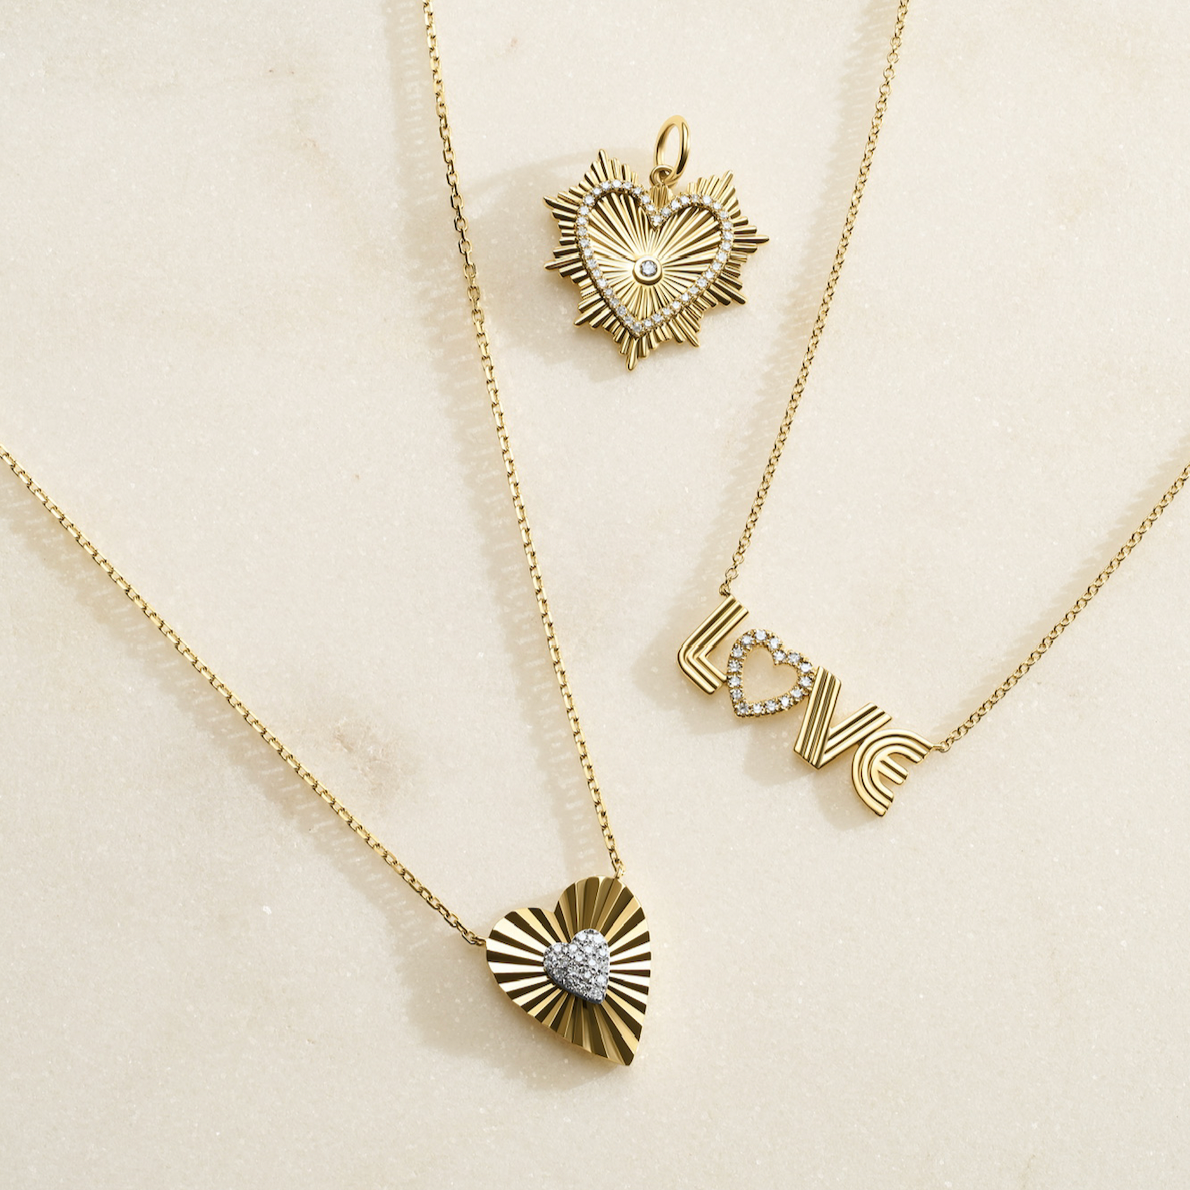 Fluted Diamond Heart Necklace